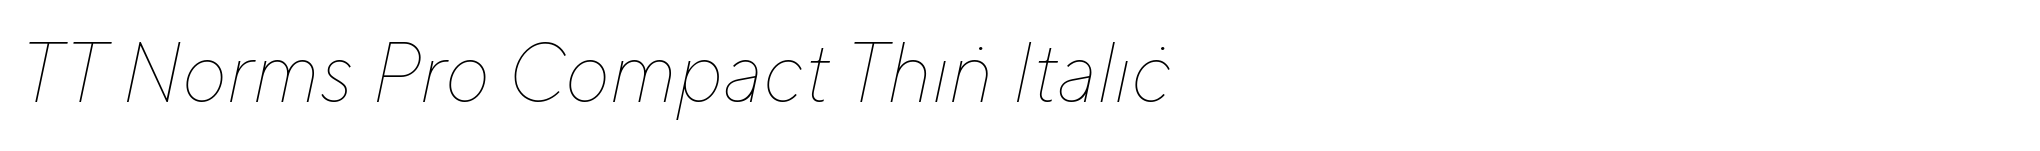 TT Norms Pro Compact Thin Italic image